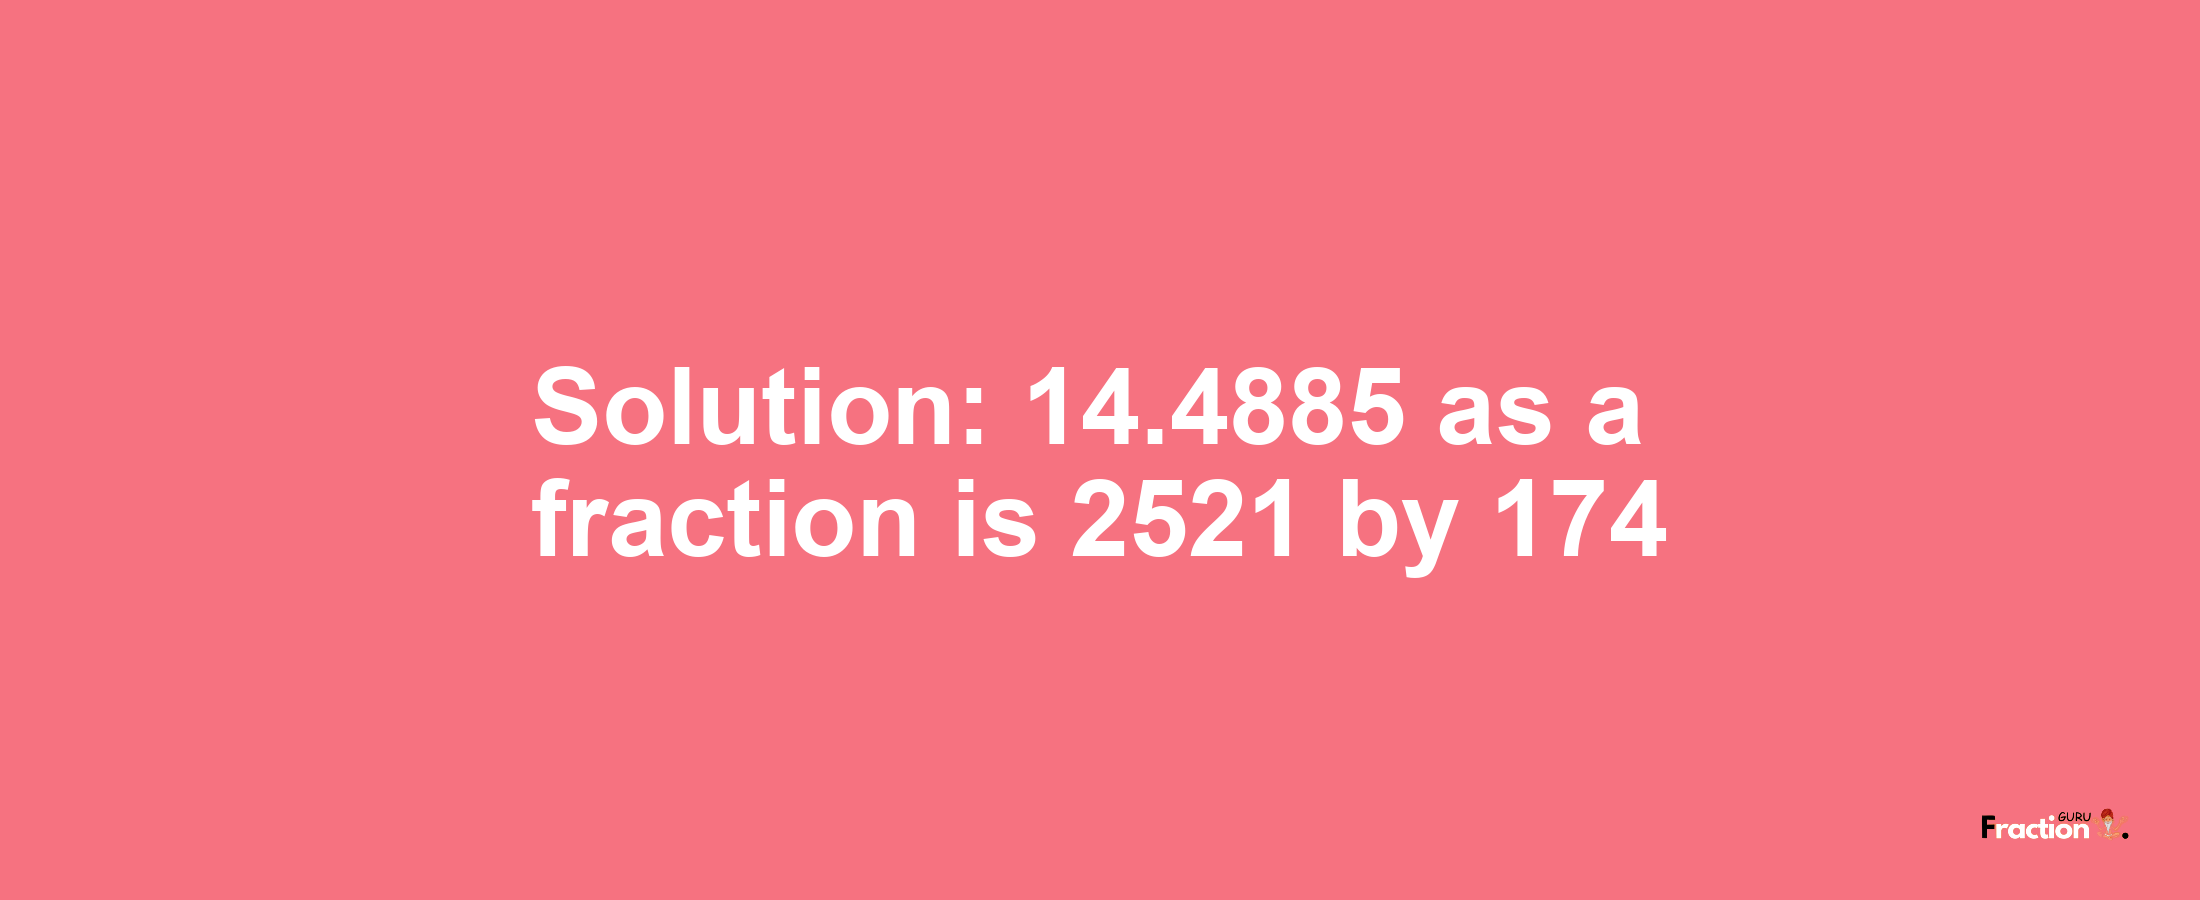 Solution:14.4885 as a fraction is 2521/174